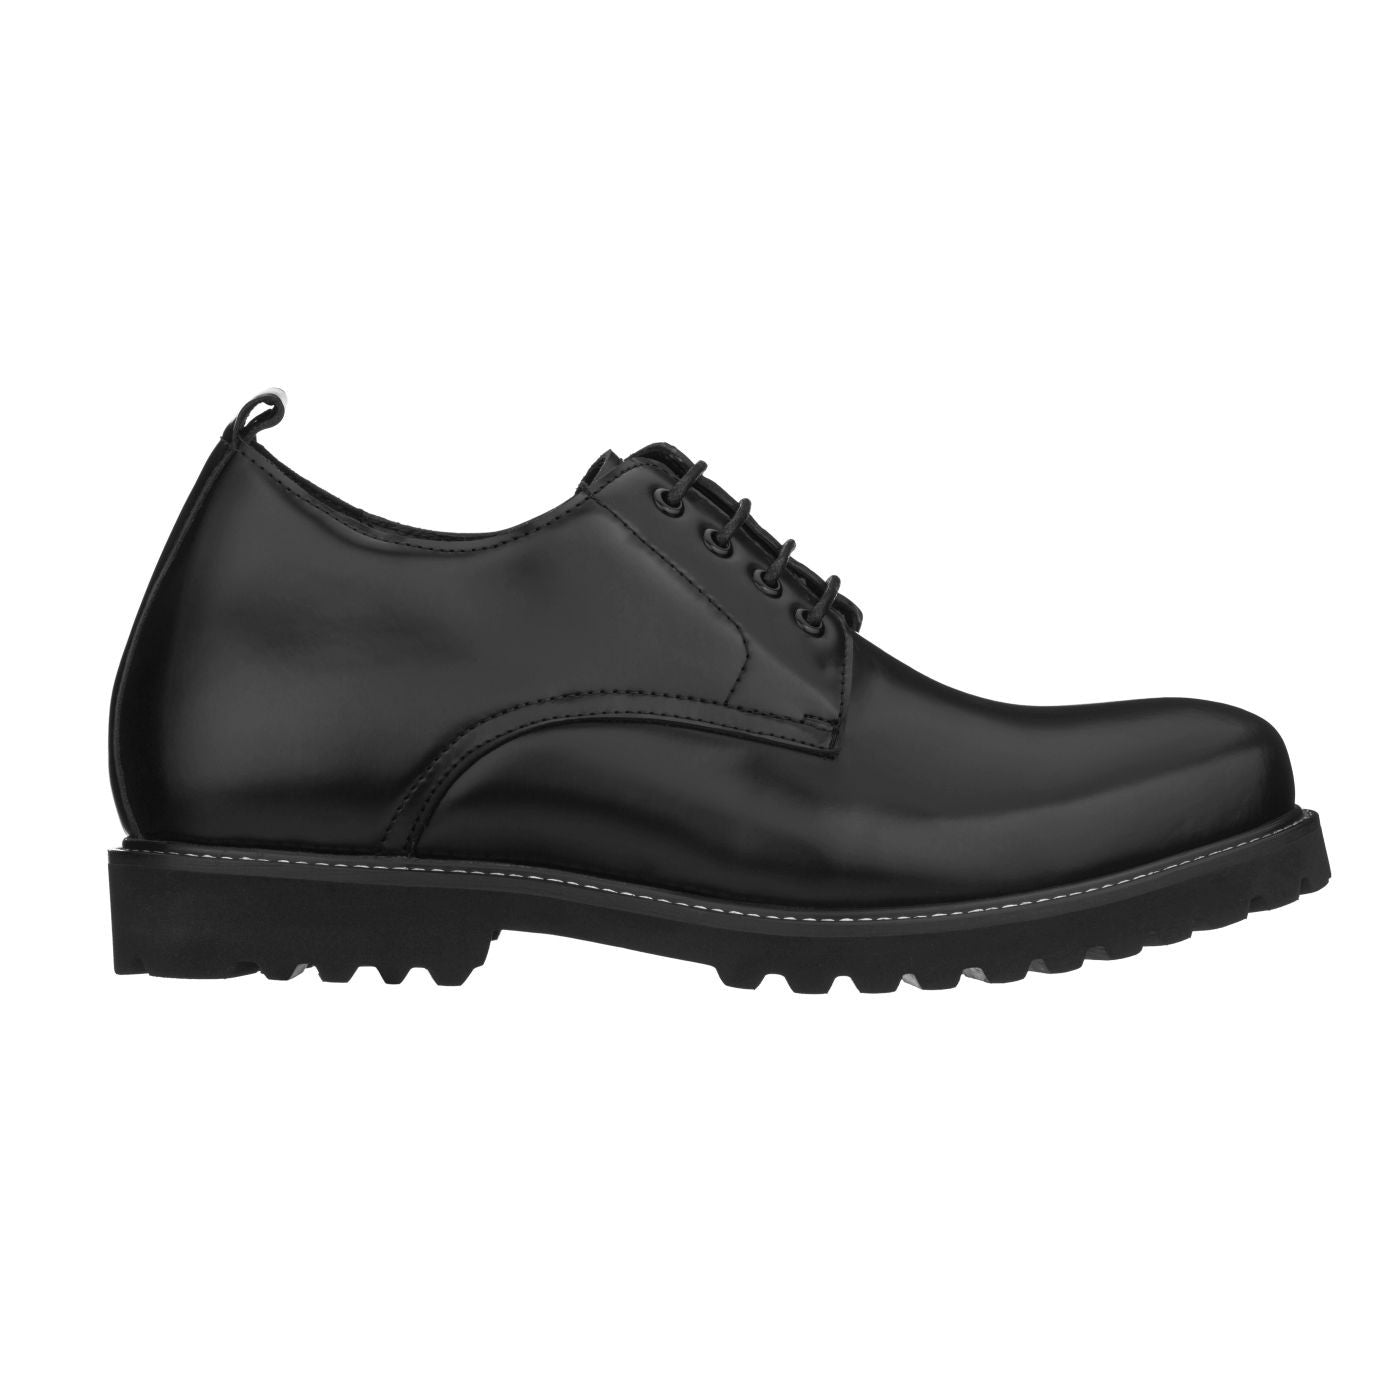 Elevator shoes height increase CALTO 3" Taller Black Leather Elevator Work Shoes